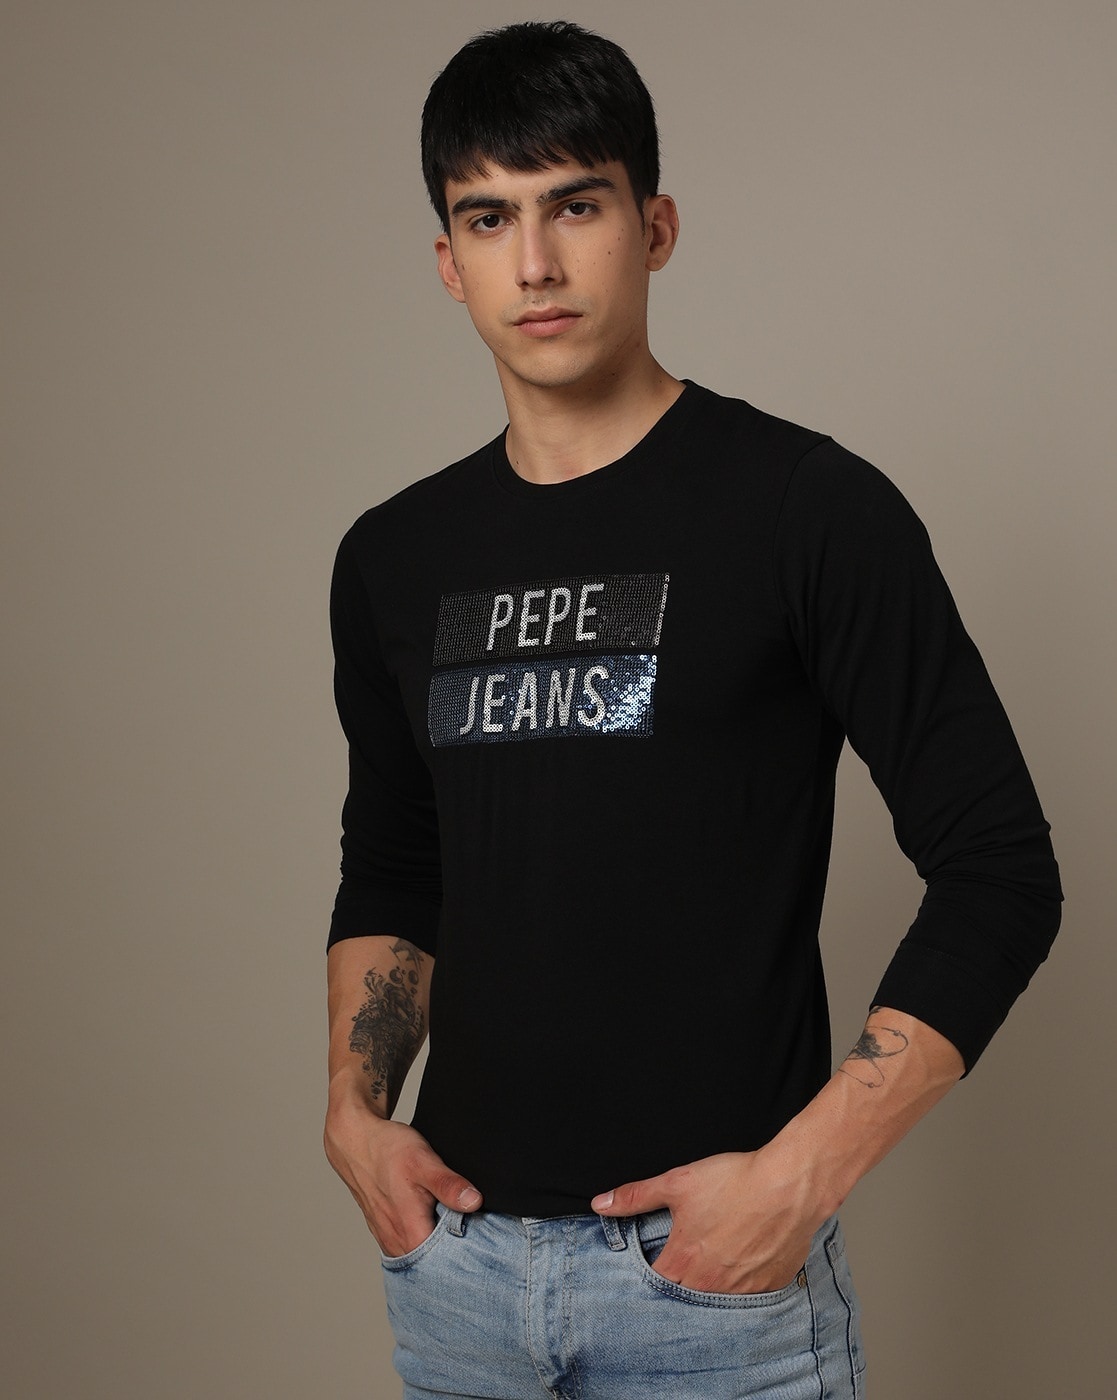 Buy Black Tshirts for Men Online Jeans Pepe by